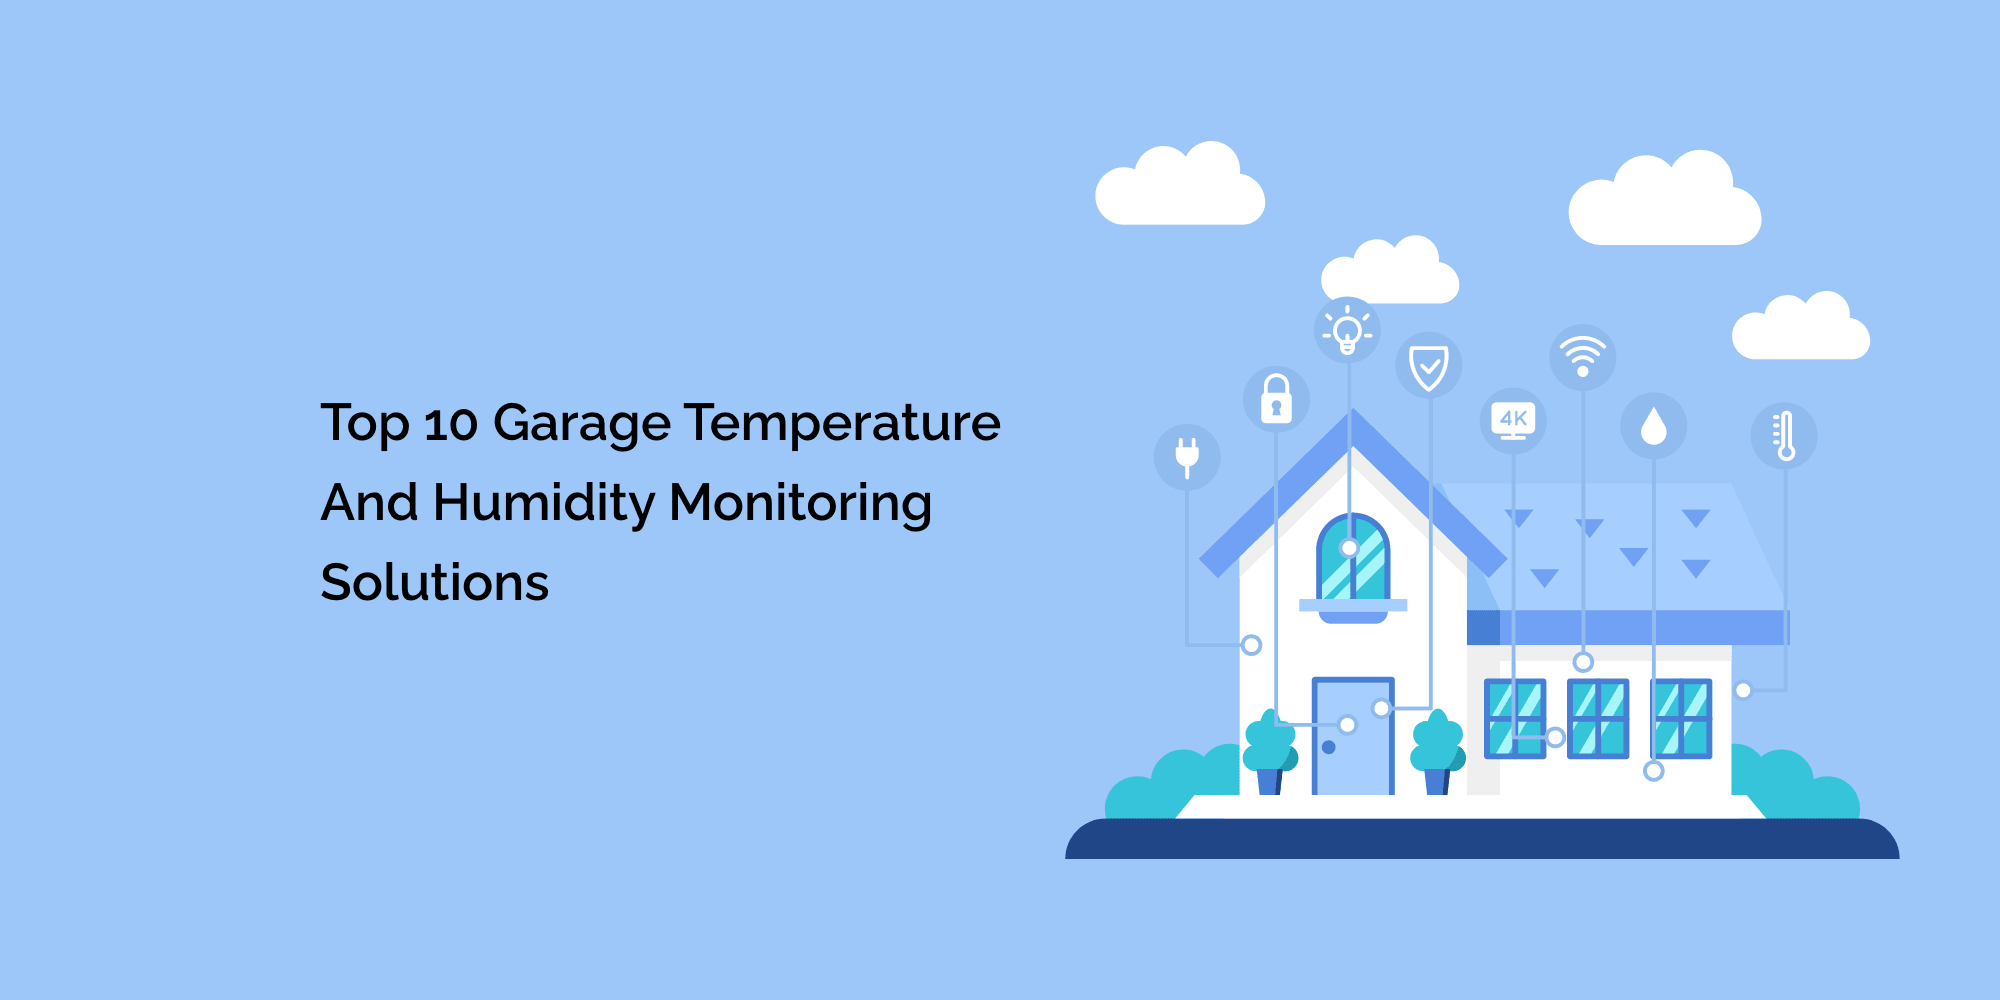 Top 10 Garage Temperature and Humidity Monitoring Solutions